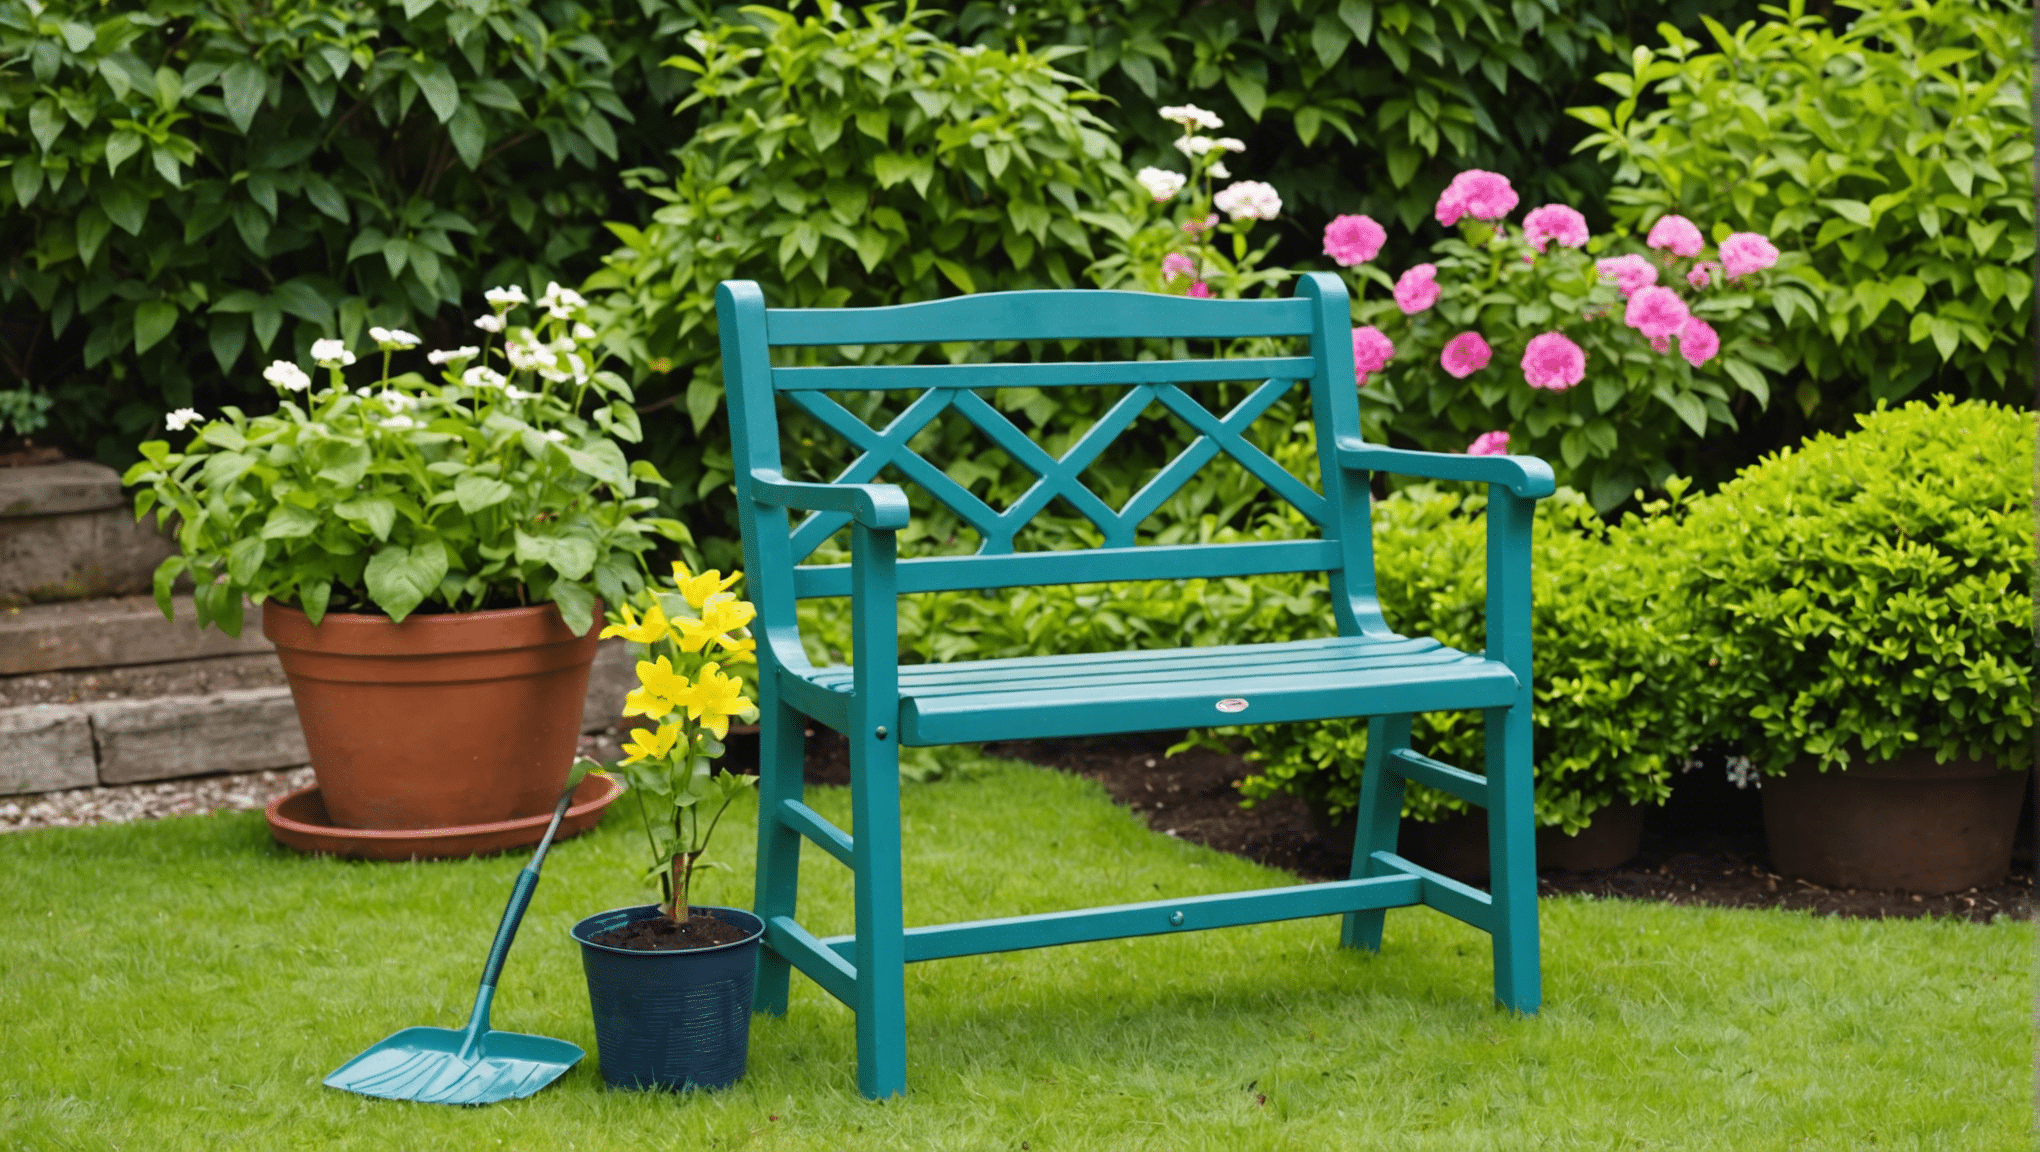 discover the benefits of using a gardening seat and how it can improve your gardening experience. save your back and knees while enjoying your time in the garden!